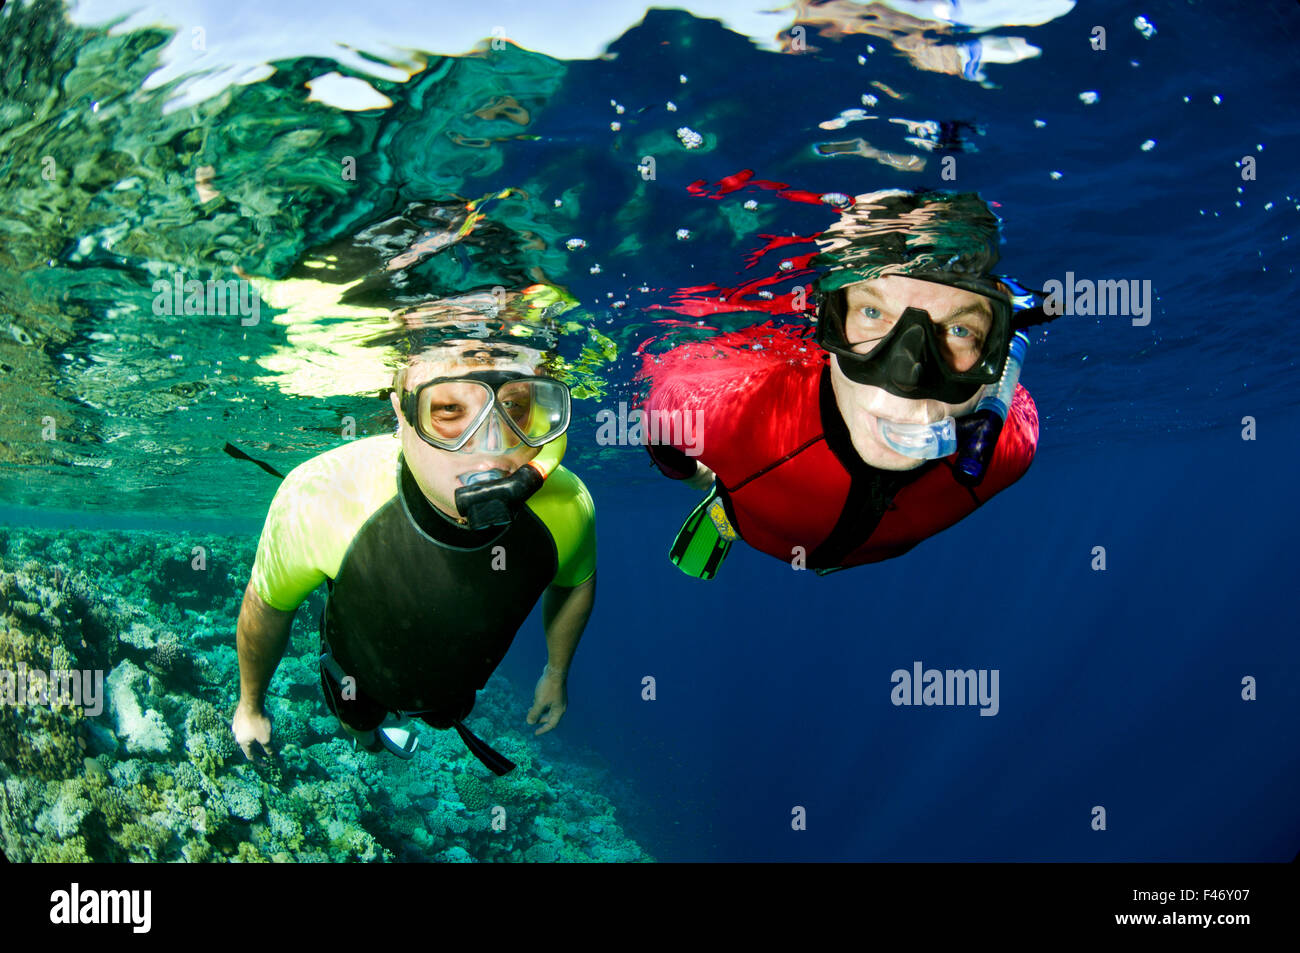 Two people snorkling, Egypt. Stock Photo